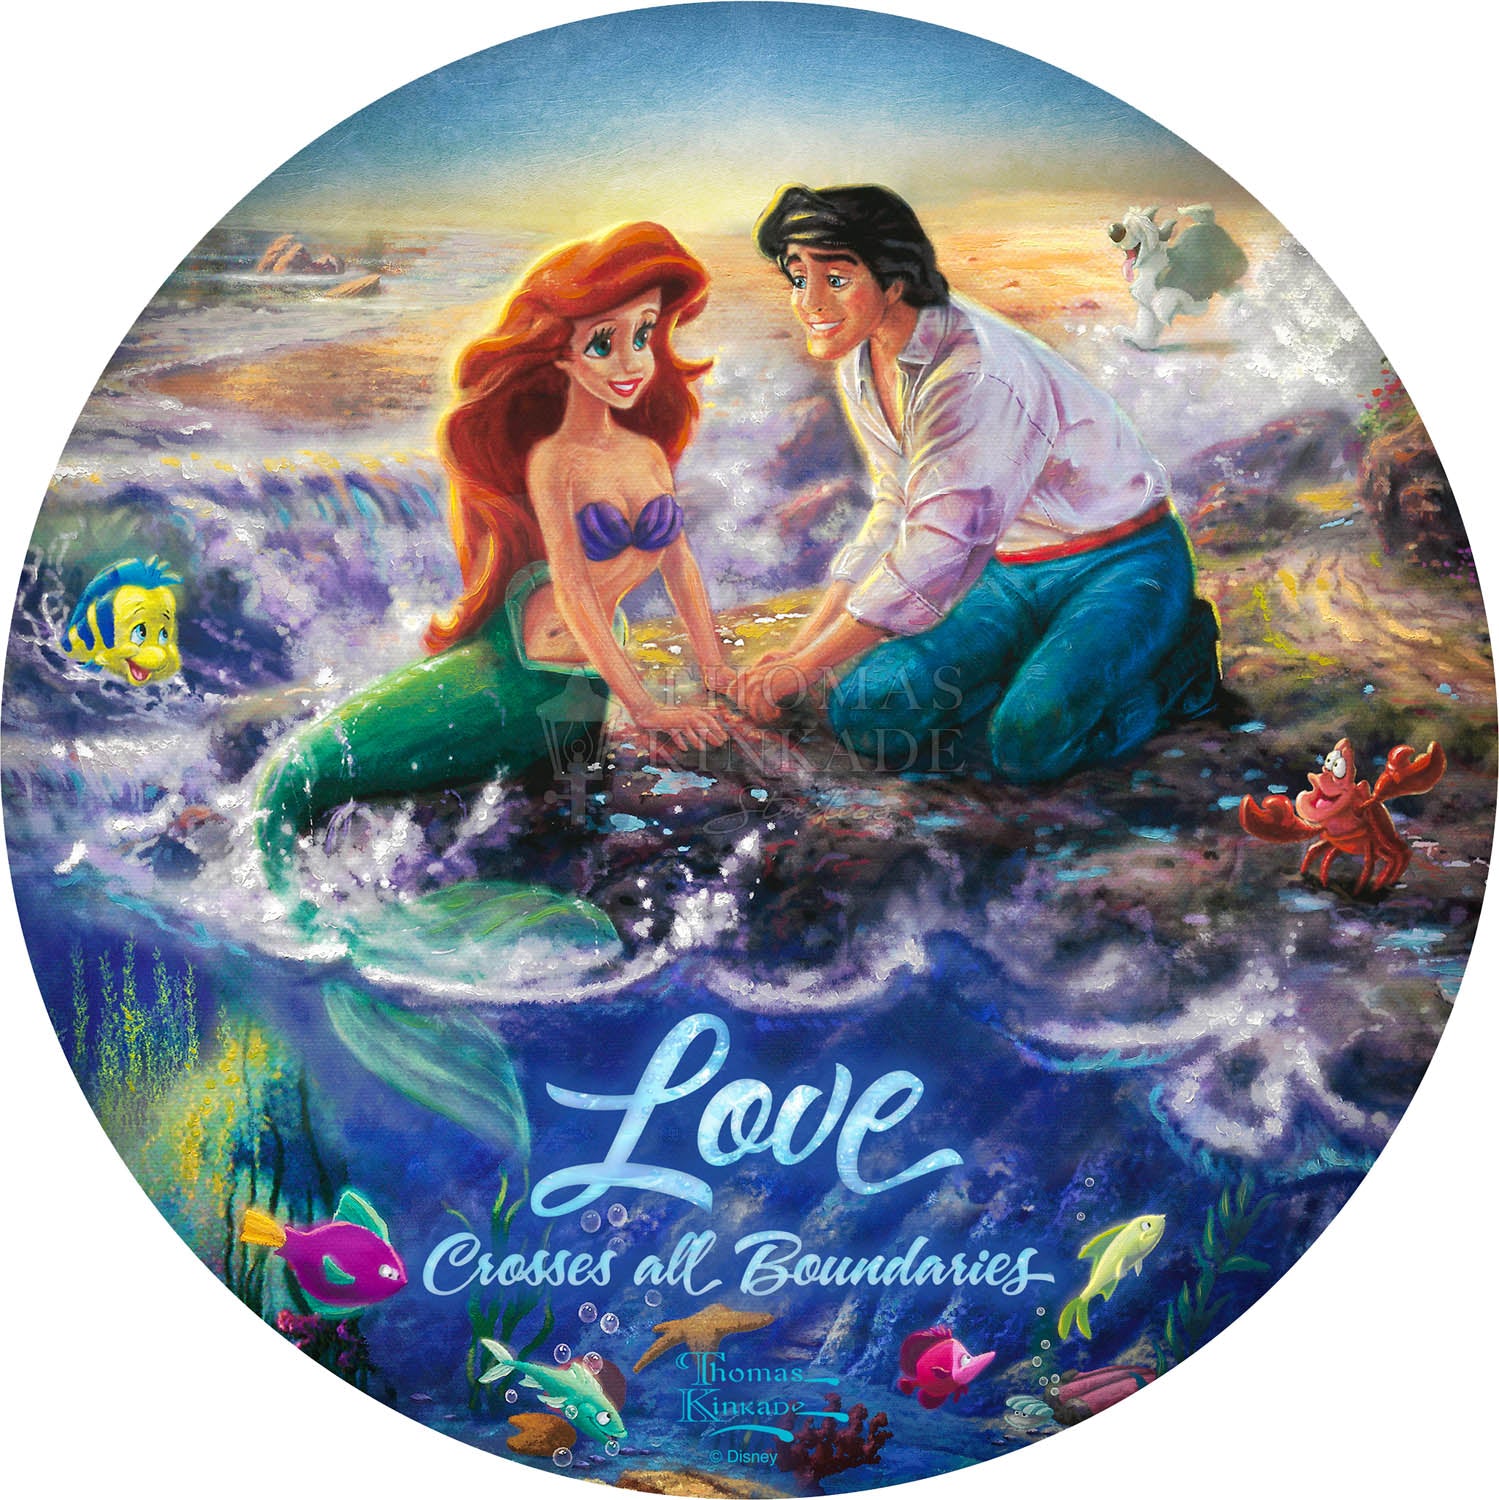 Ariel and Prince Eric are sitting by the shore. Wood Signs